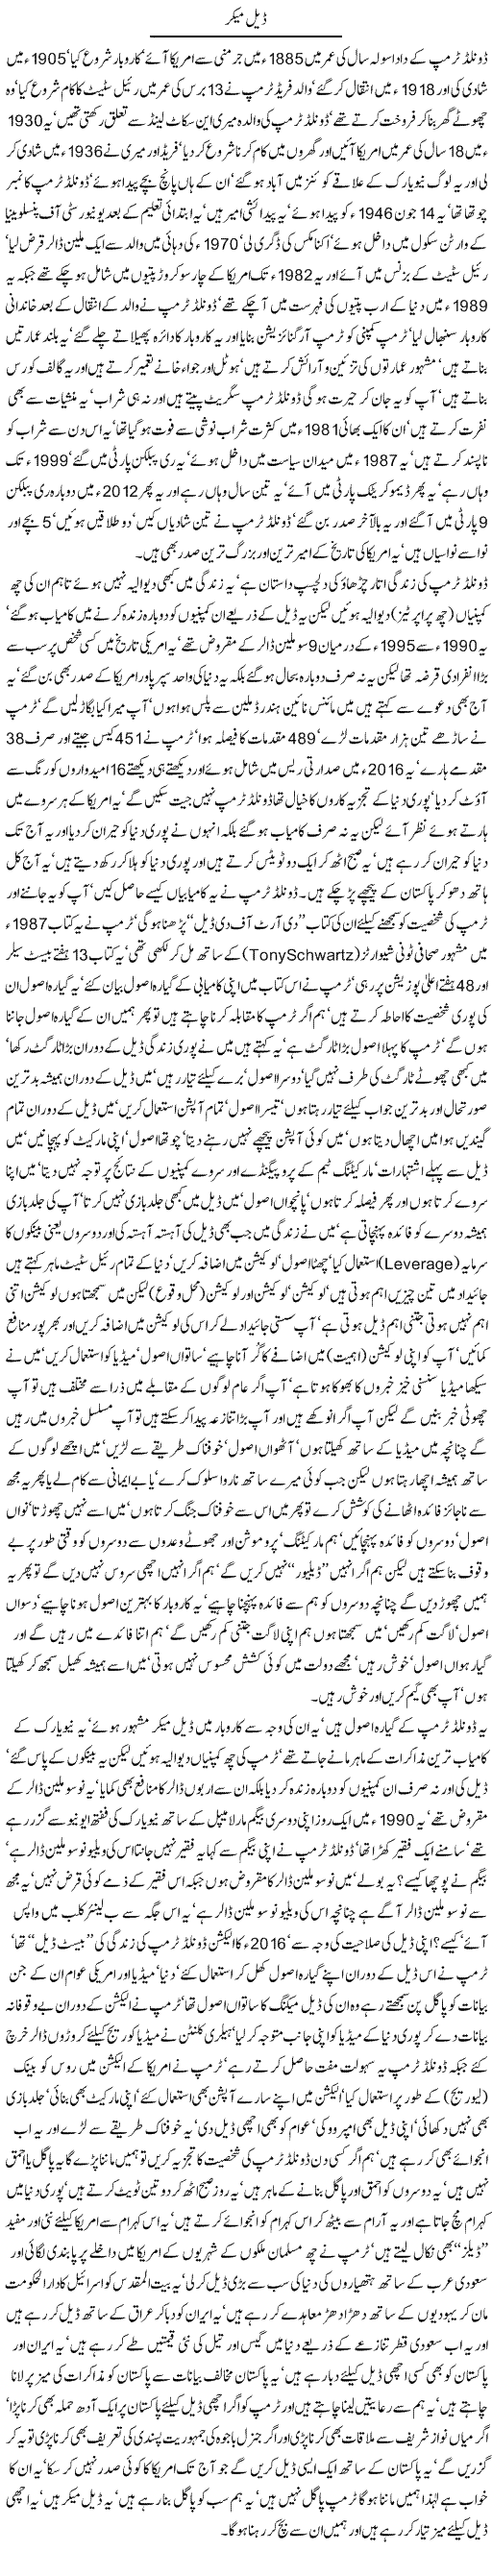 Deal Maker By Javed Chaudhry